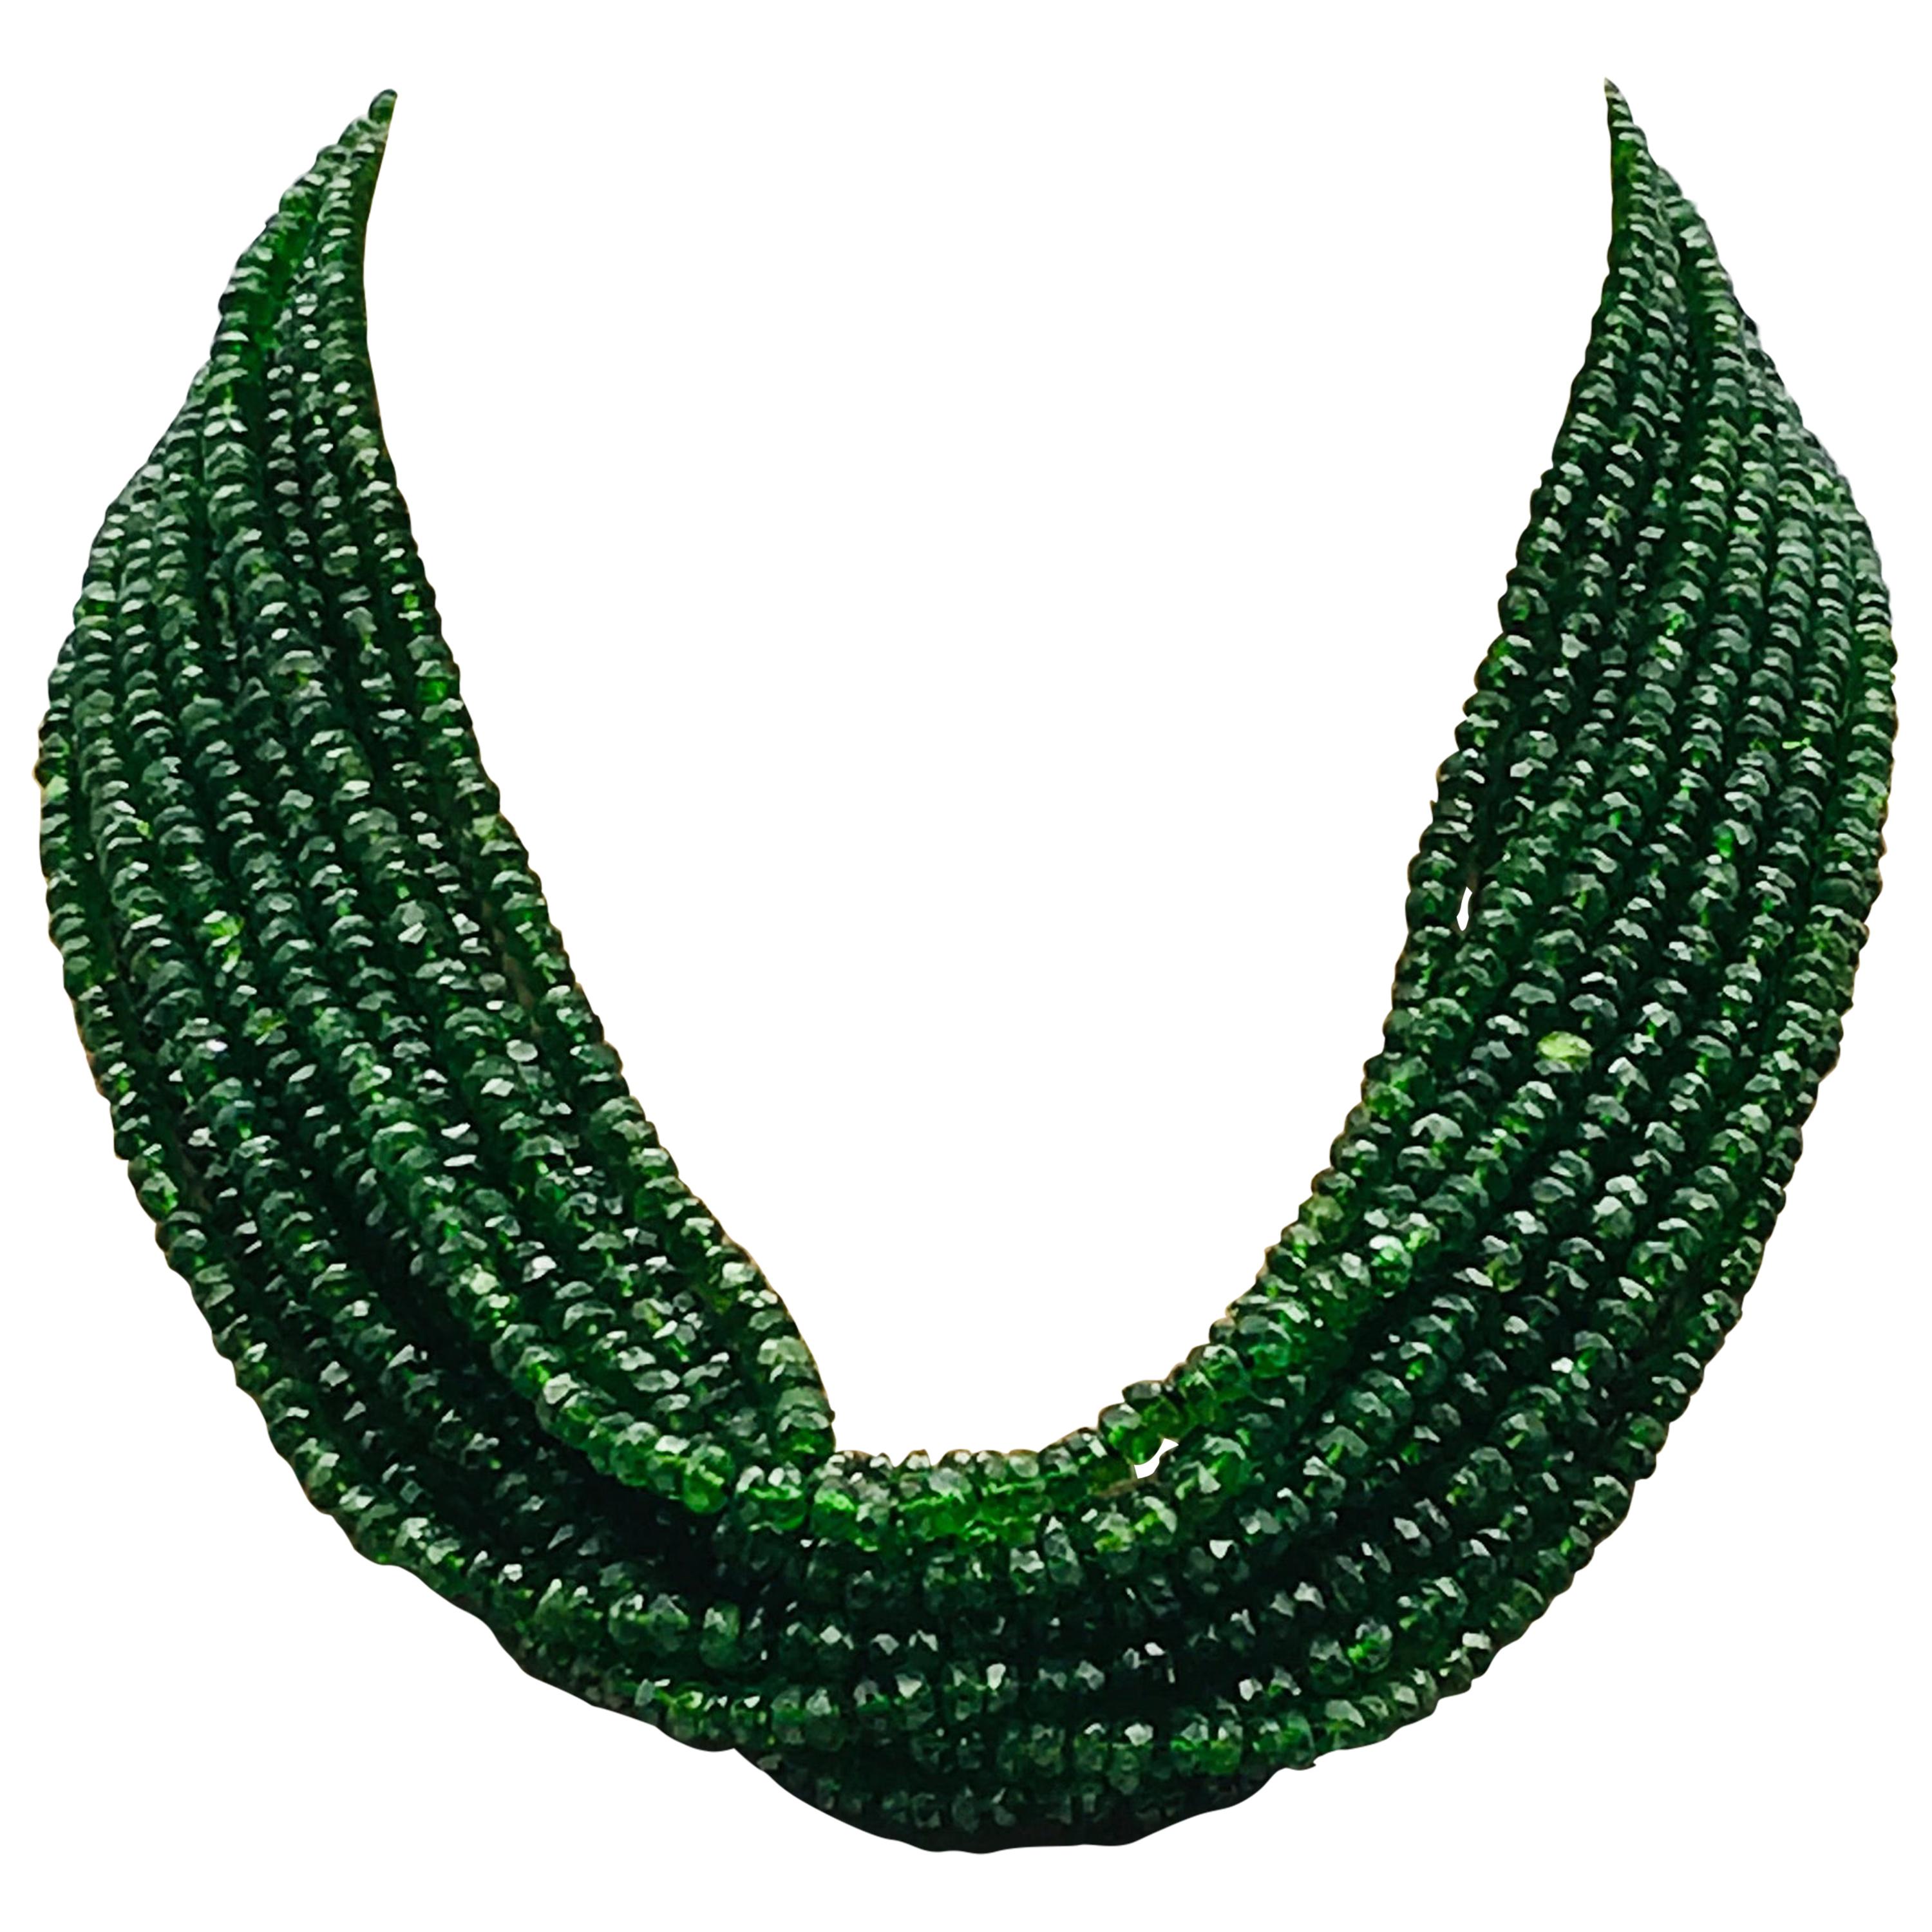 Neacklace Diopside Pearl Multi-Strand Bakelite Clasp